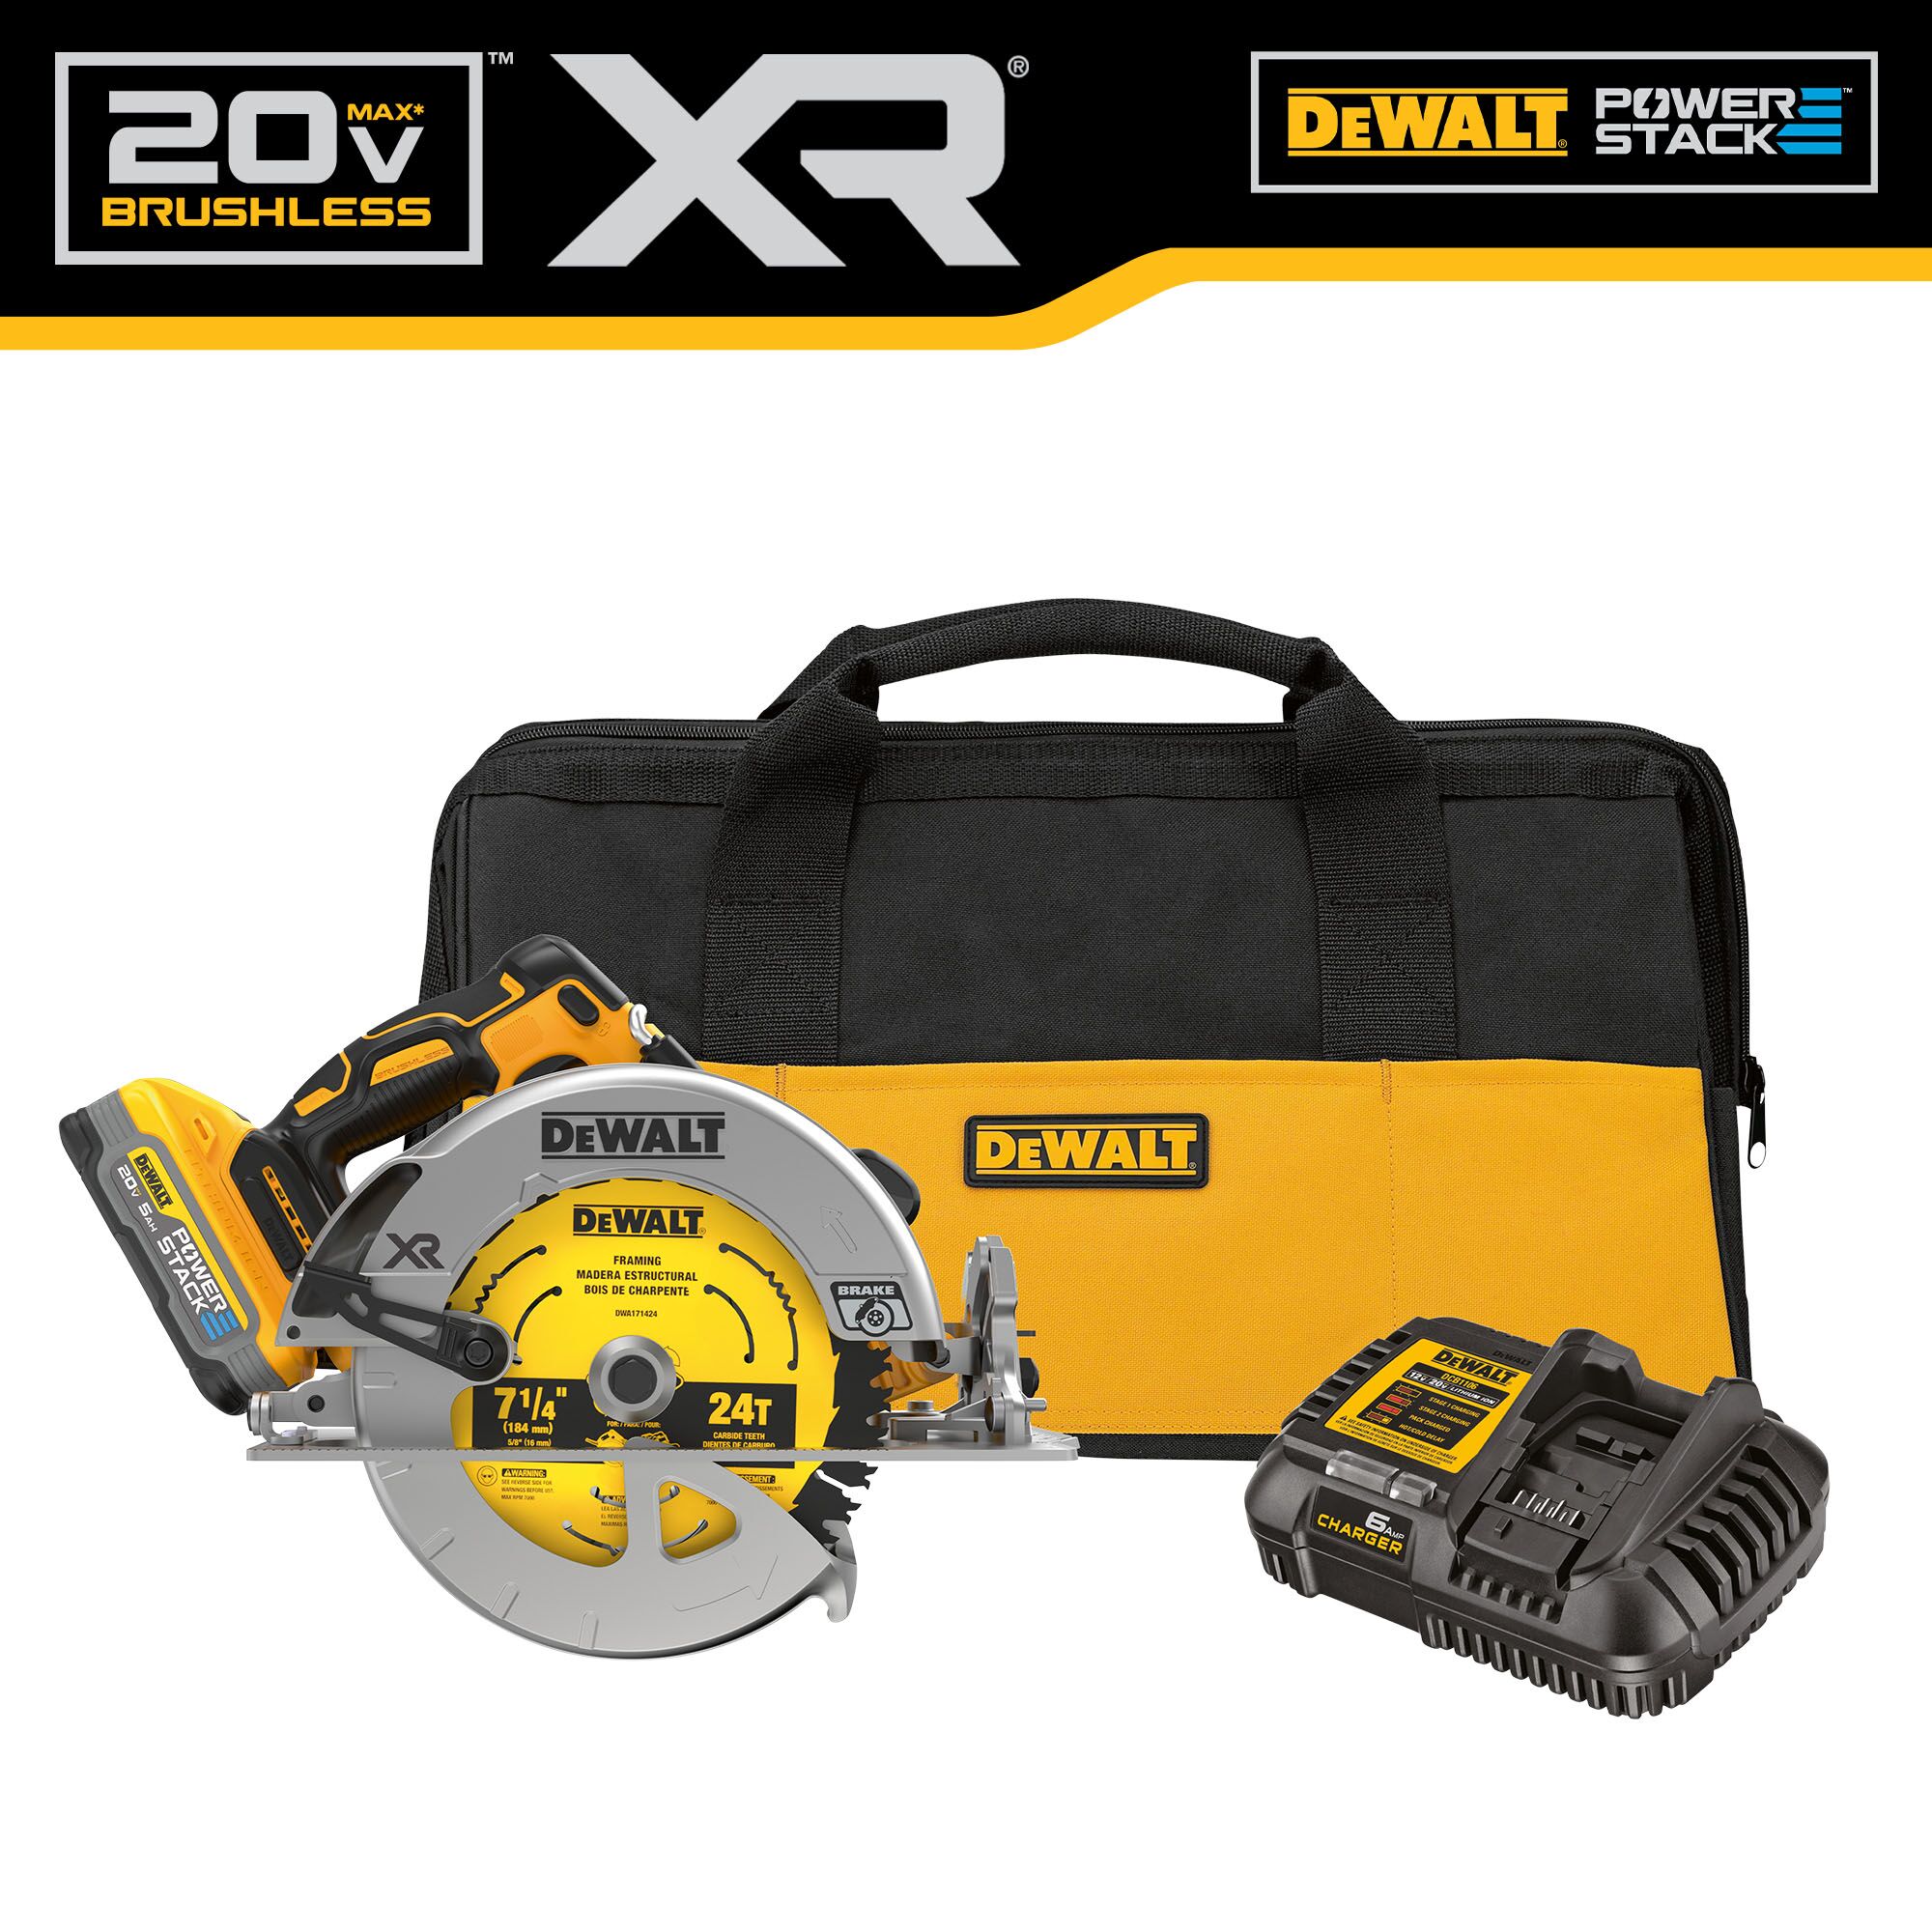 DEWALT XR 20-volt Max 7-1/4-in Brushless Cordless Circular Saw Kit  (1-Battery & Charger Included)